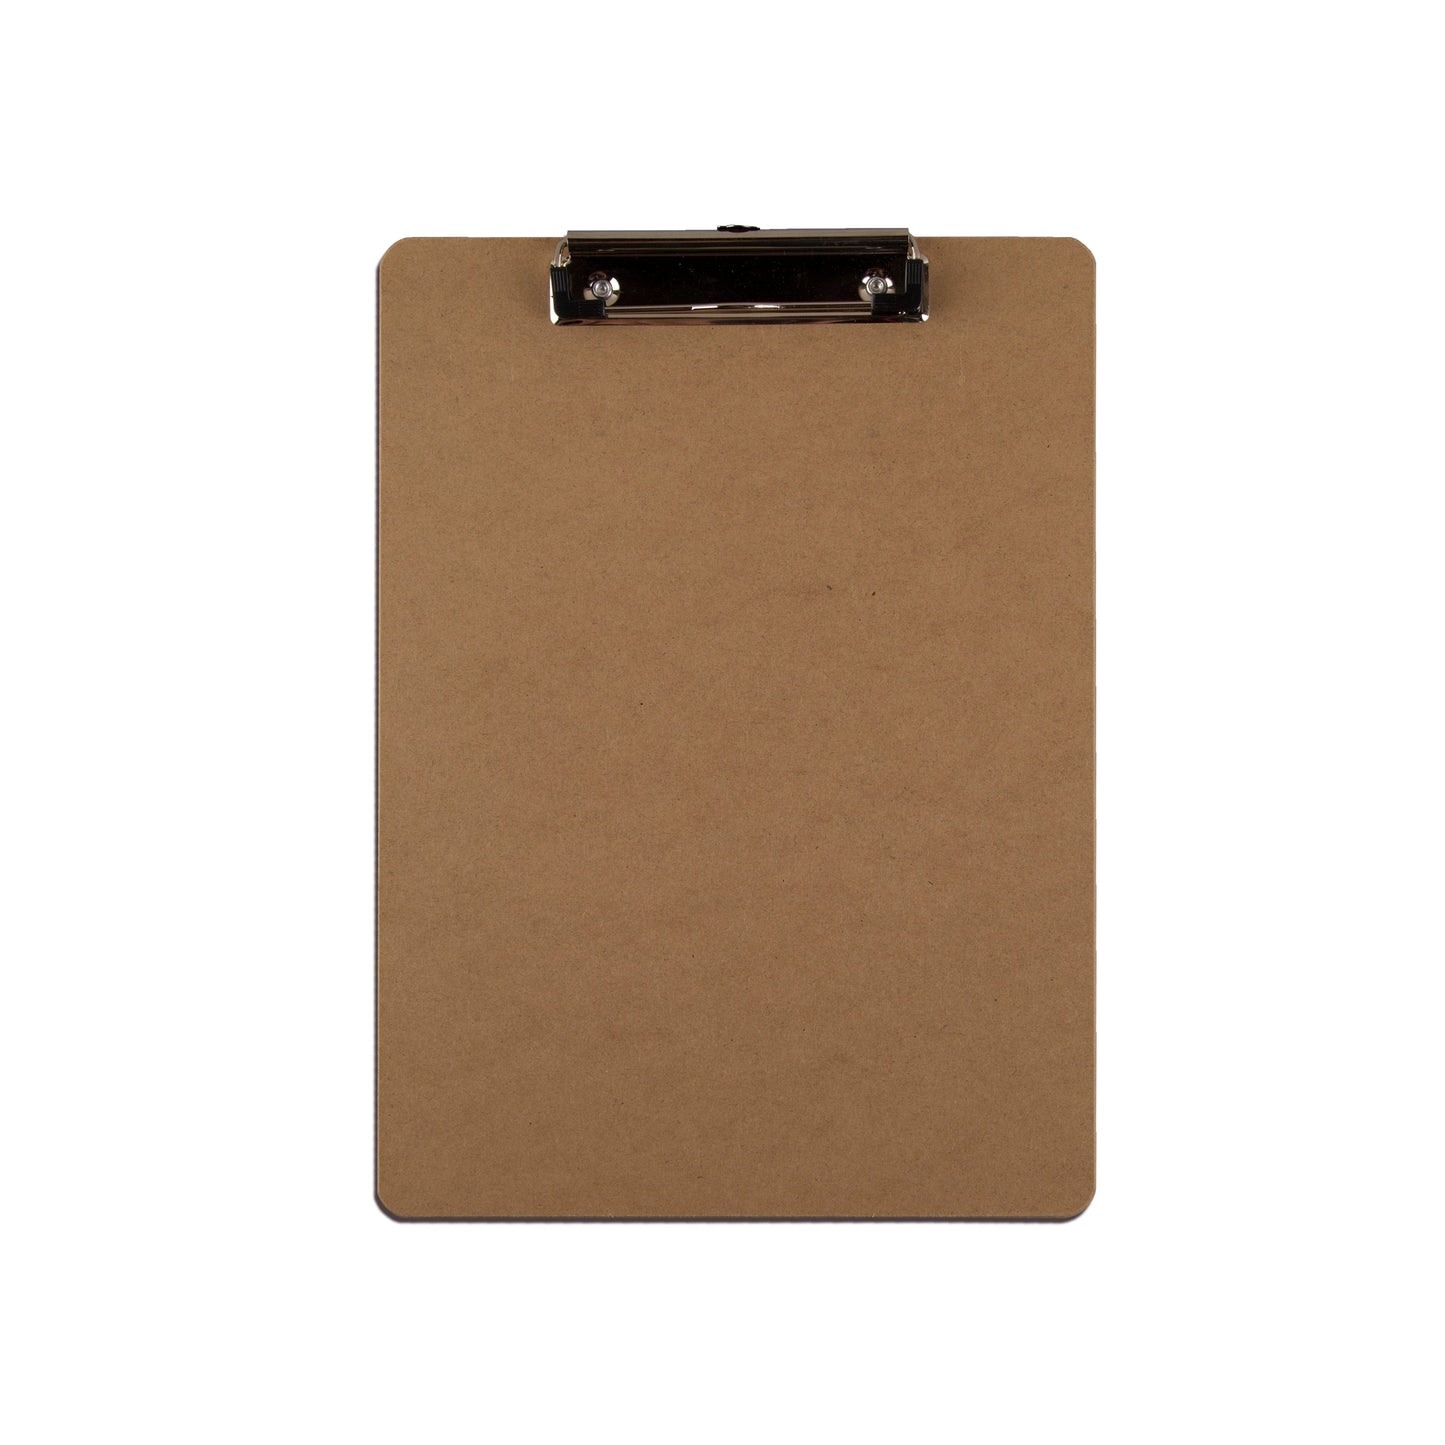 M32 Factory Custom Portable Writing Boards Profile Clip, 9X12 Inch Double Sided Dry Erase Frameless Stationery Clipboard - Premium dry erase lapboard from Madic Whiteboard - Madic Whiteboard